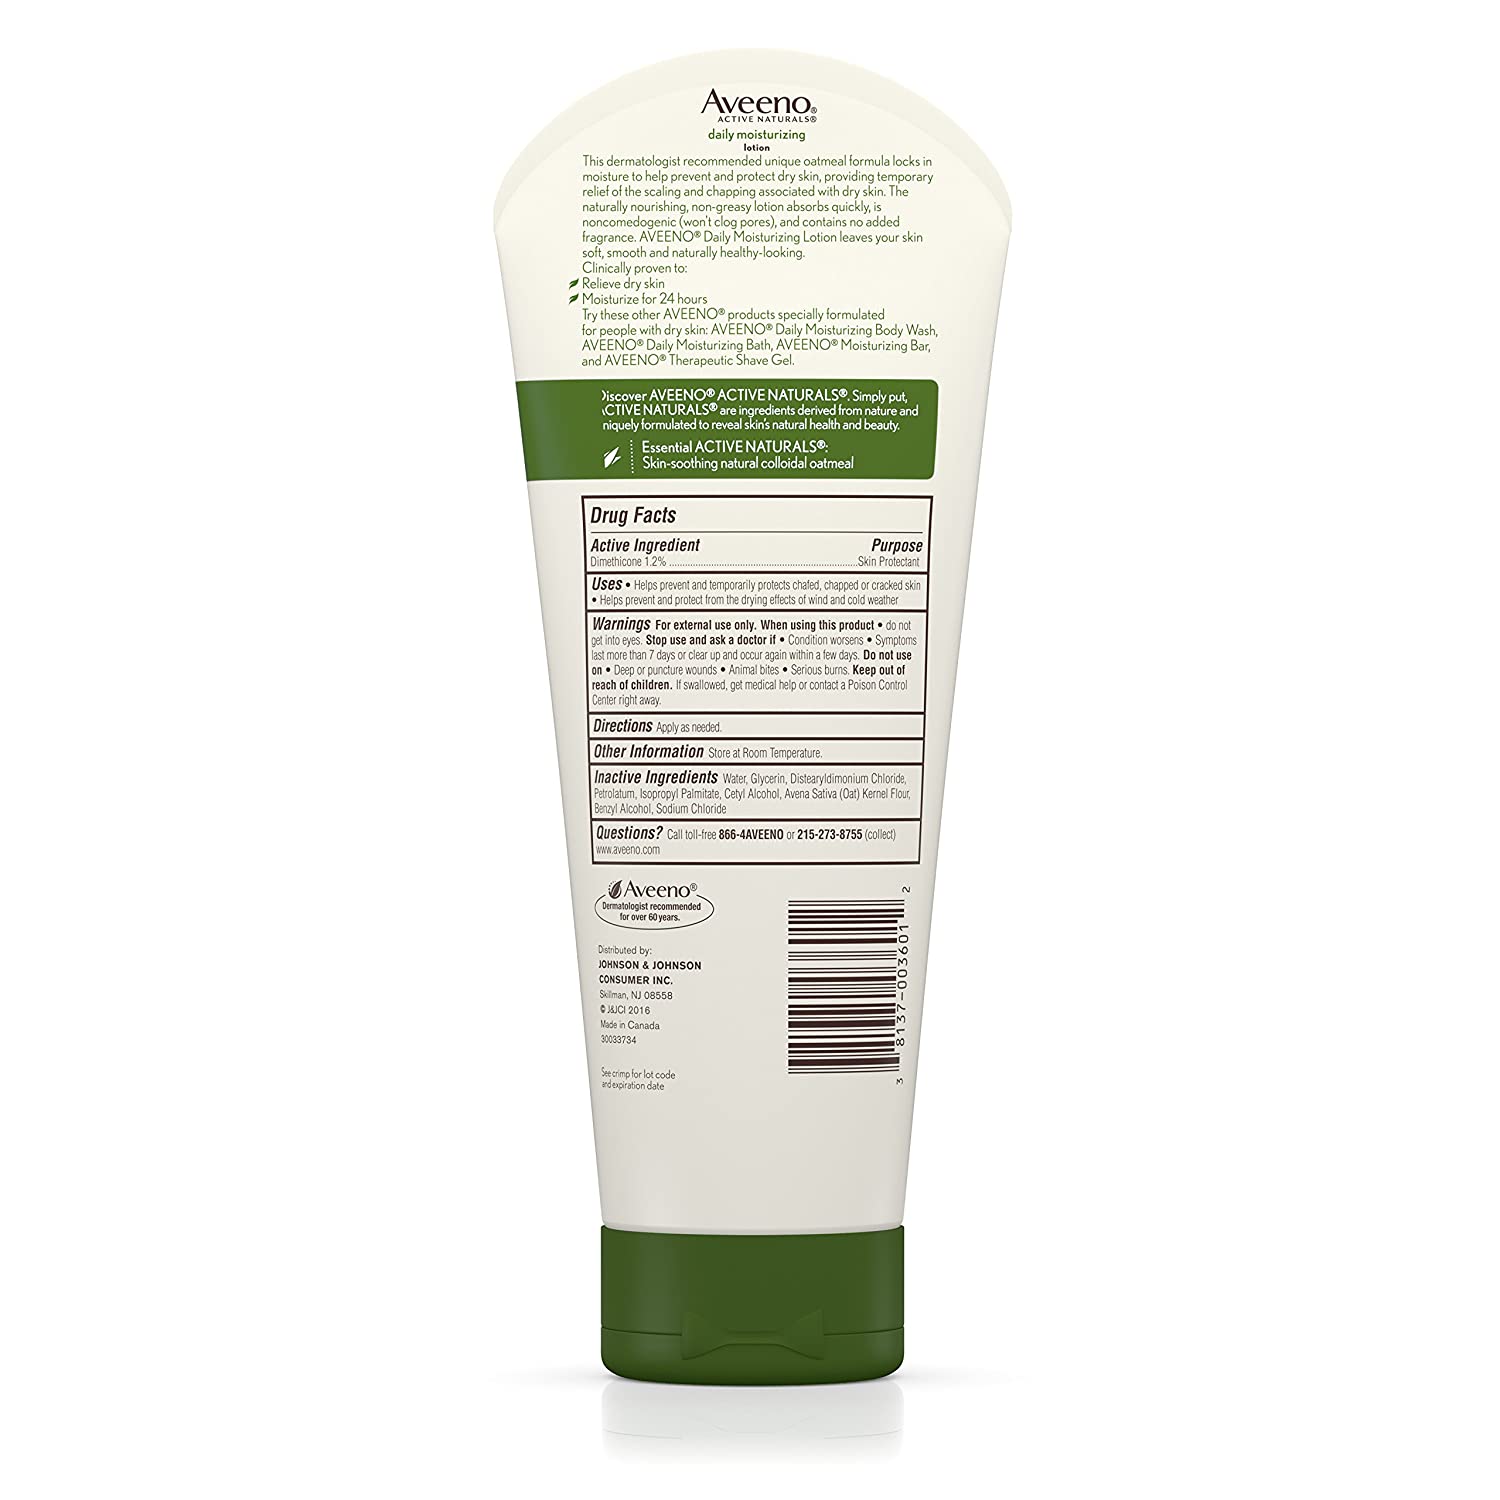 Aveeno Daily Moisturizing Lotion With Oat For Dry Skin, 2.5 oz, 2-Pack - image 3 of 3